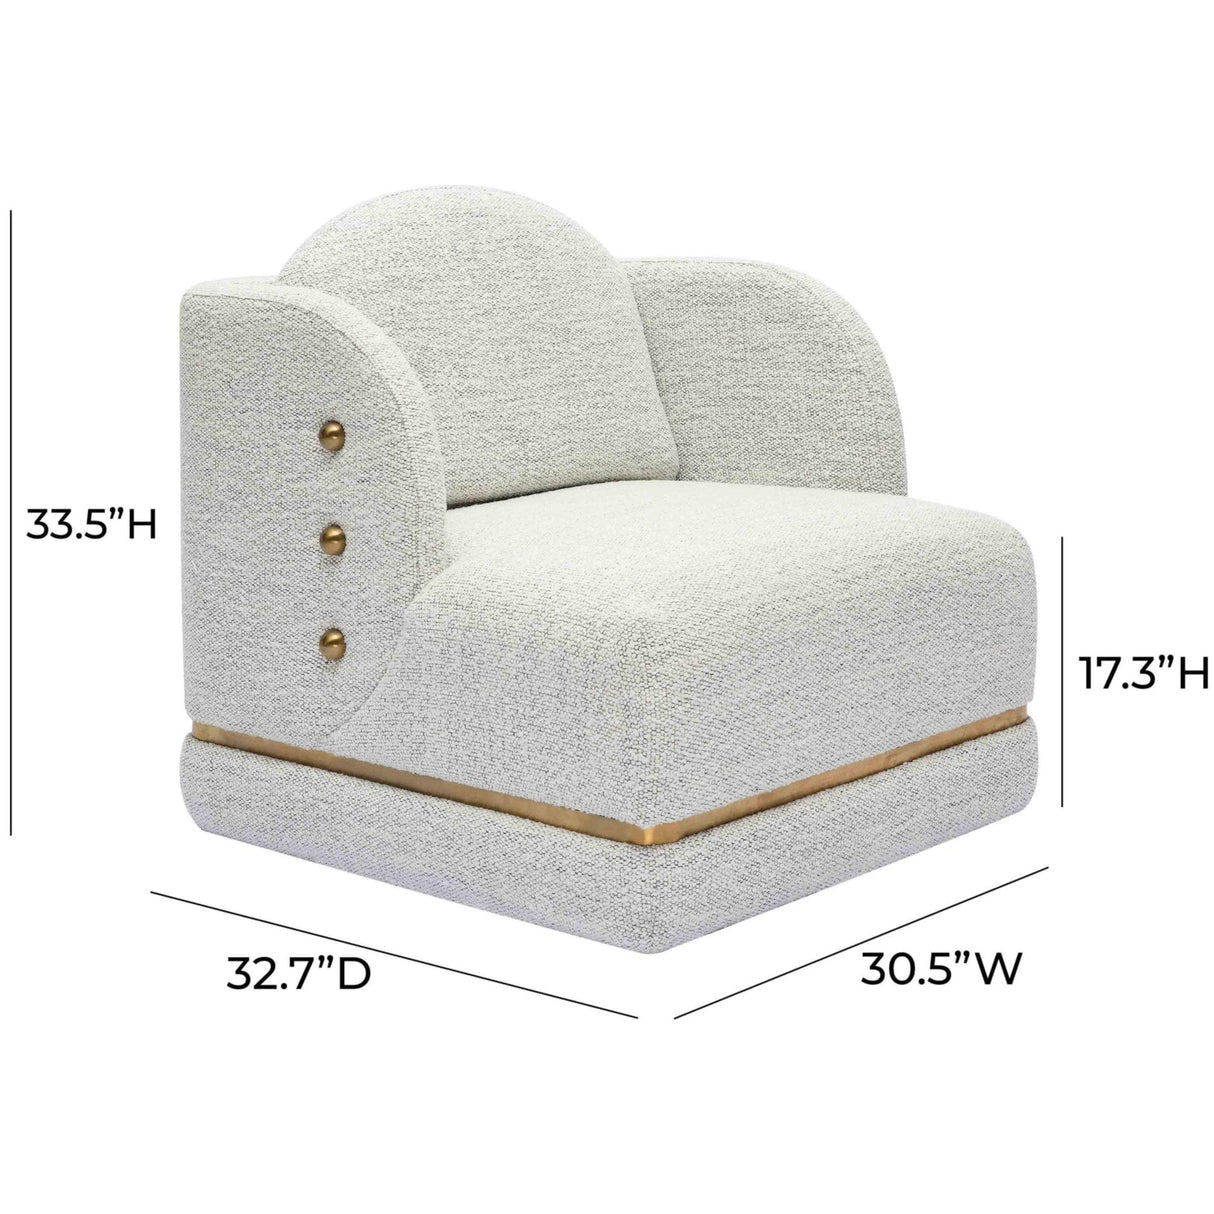 Candelabra Home Earl Nubby Chenille Accent Chair Occasional Chair TOV-S68935